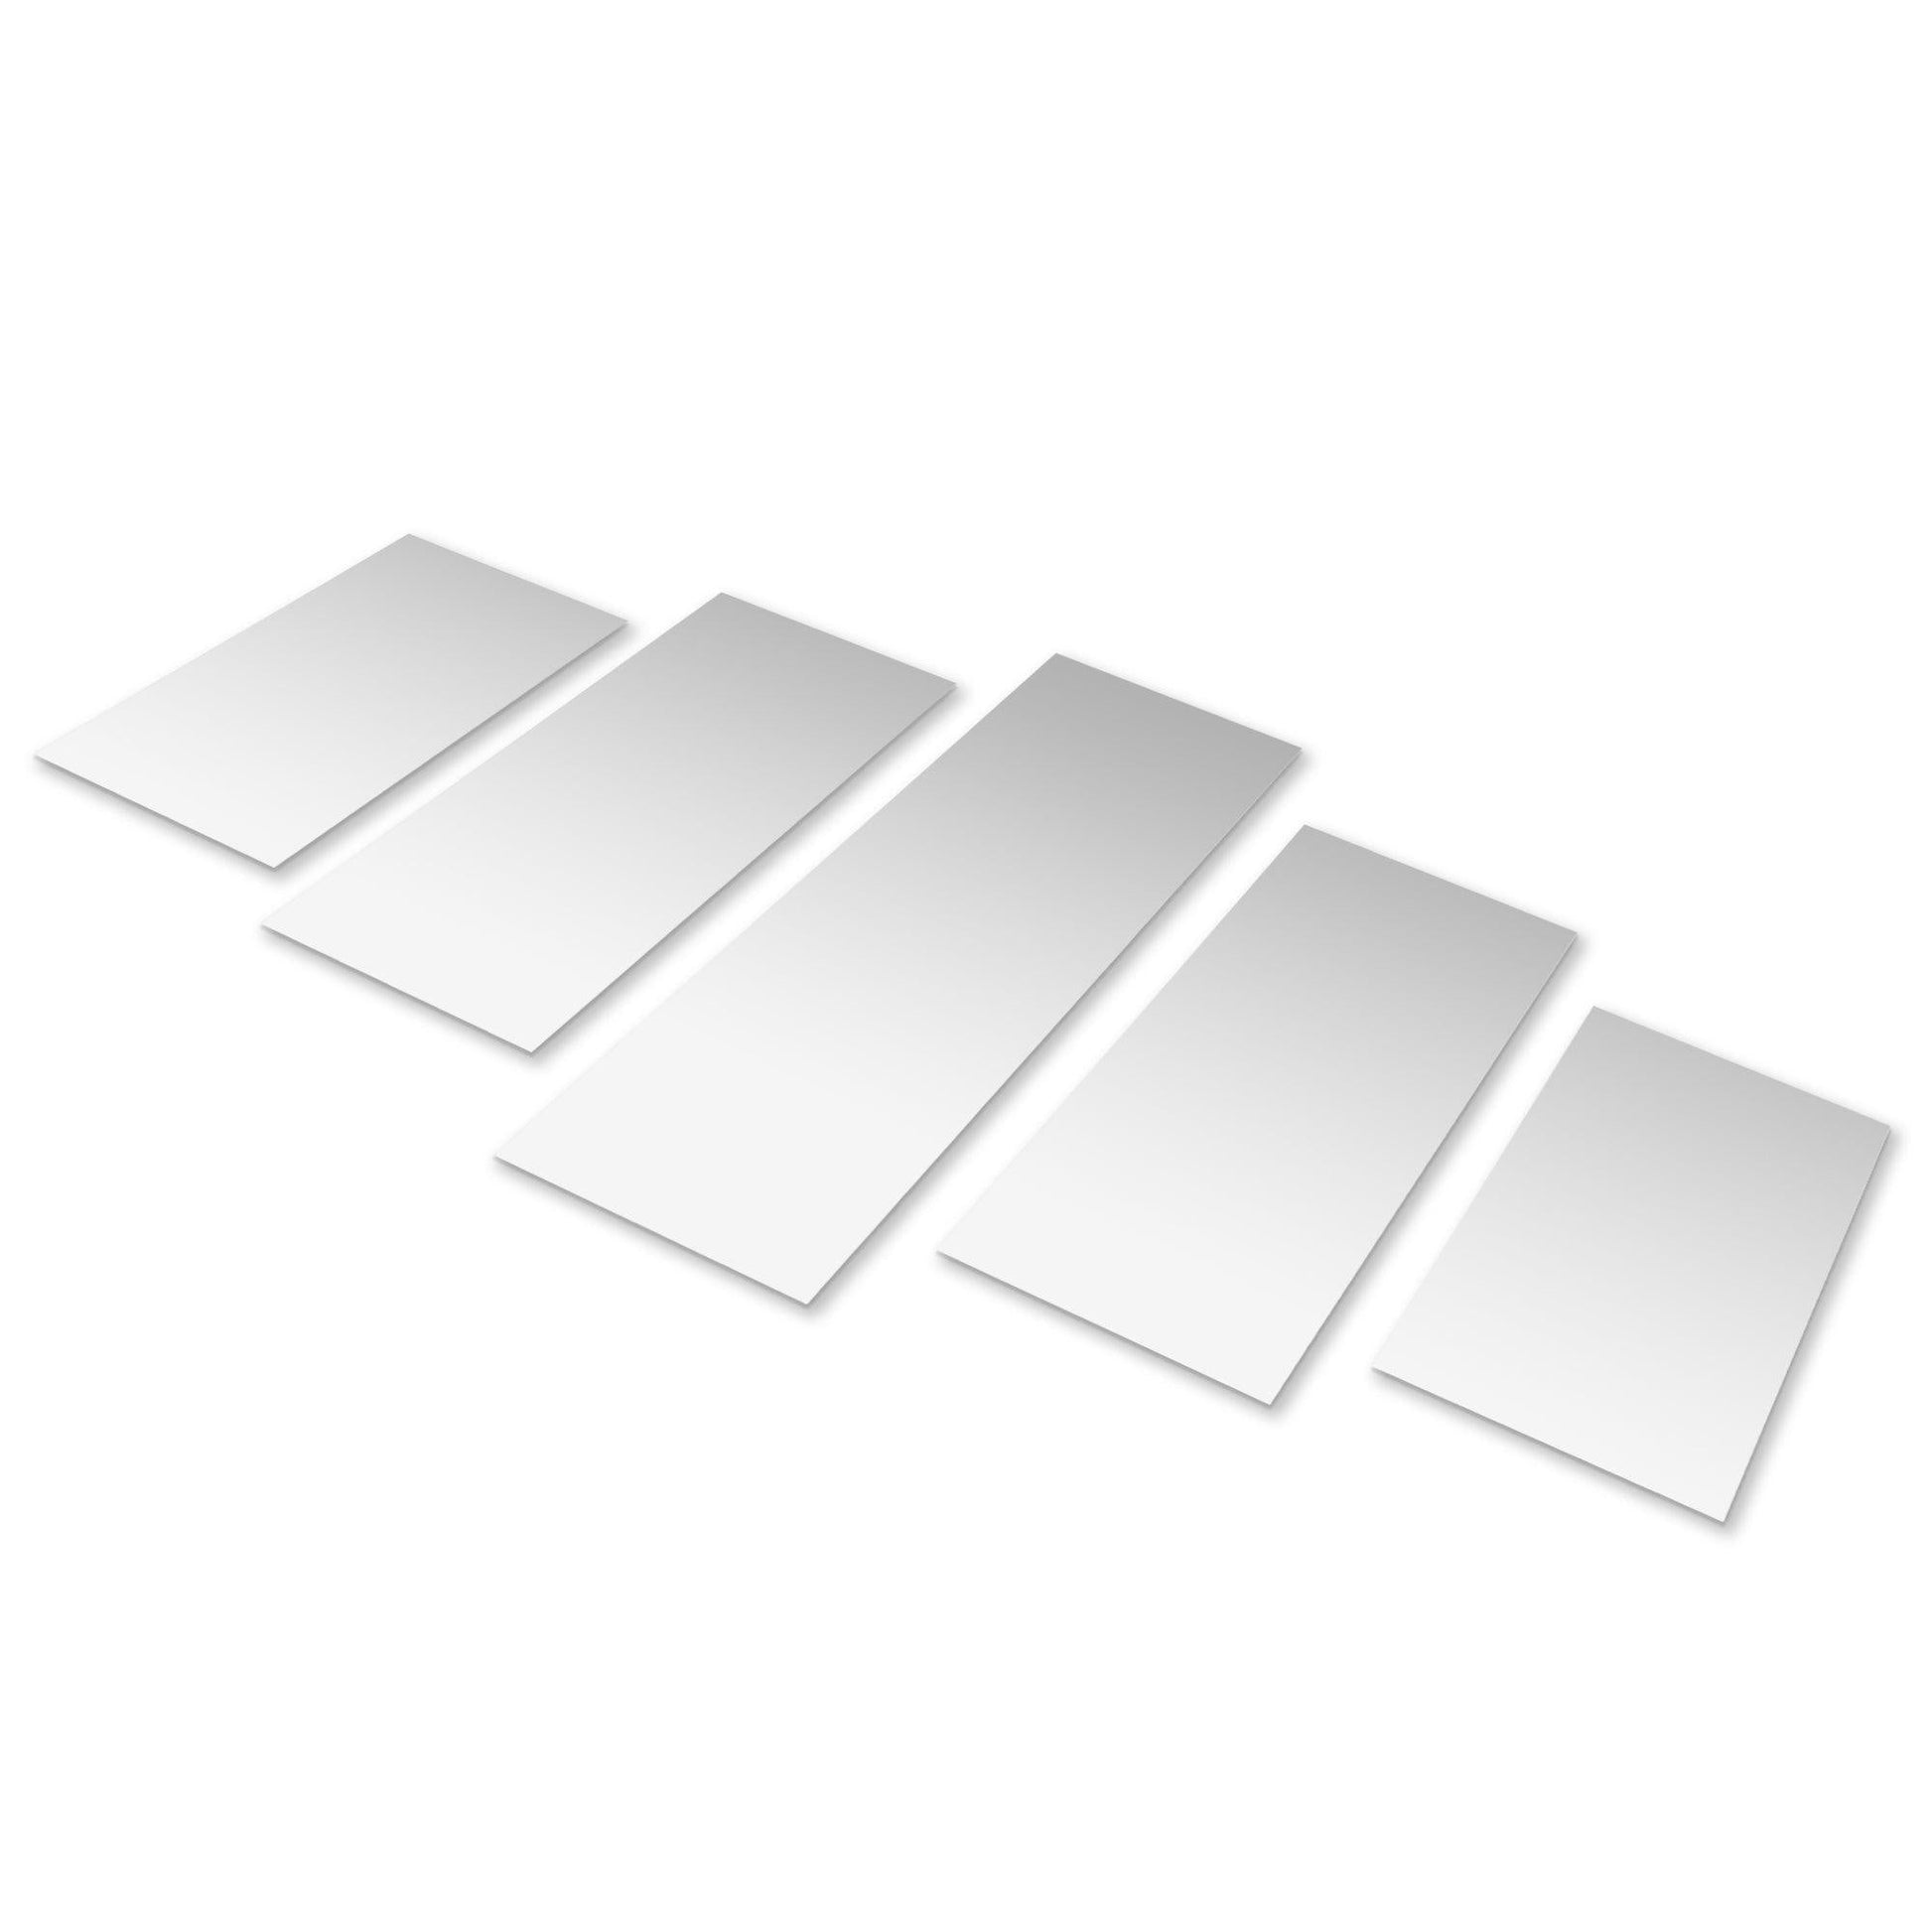 Americanflat Adhesive Mirror Tiles - Peel and Stick Mirrors for Wall -  Frameless Round Mirrors for Bedroom and Living Room DÃ©cor - ShopStyle